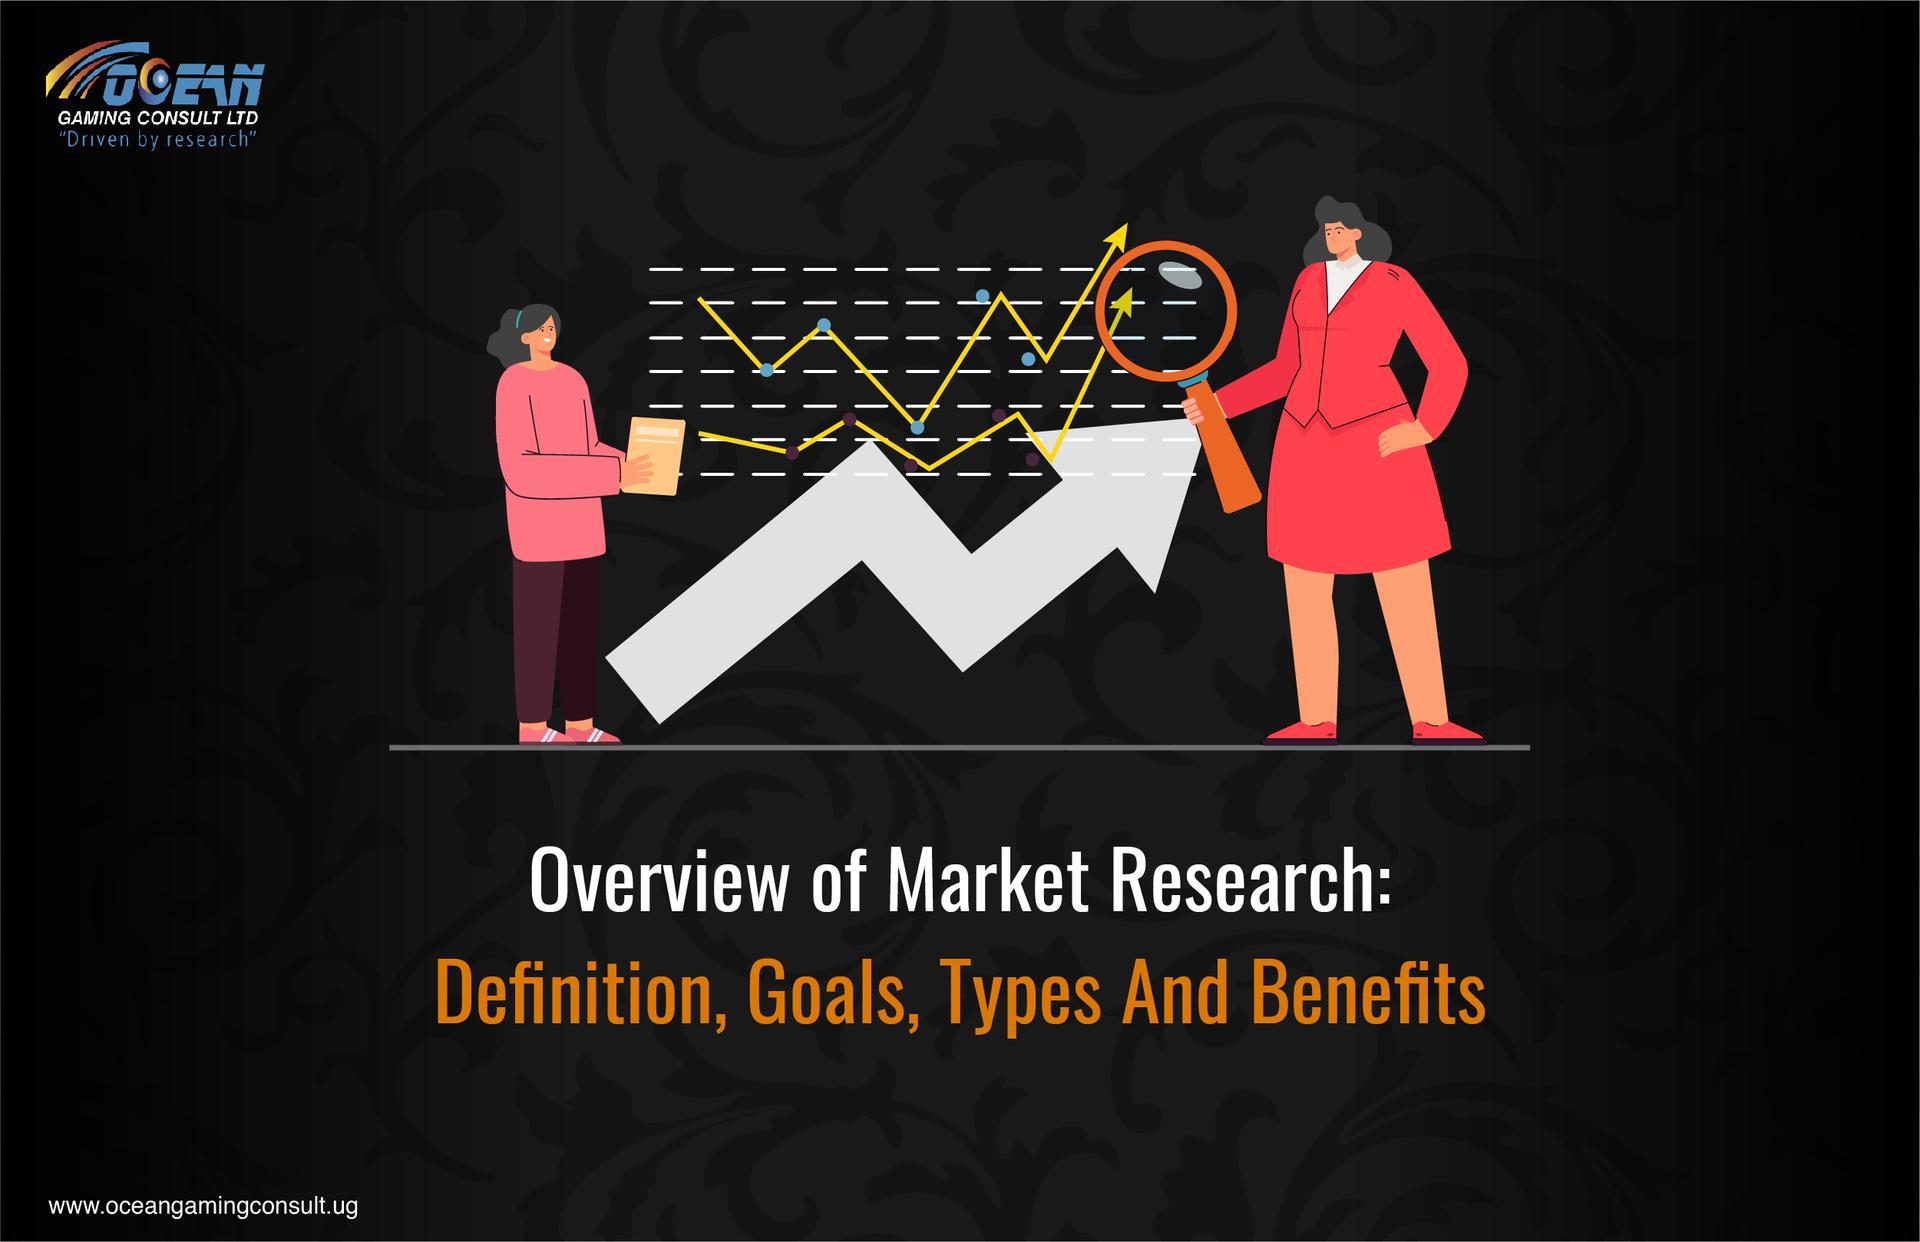 Overview of Market Research: Definition, Goals, Types And Benefits